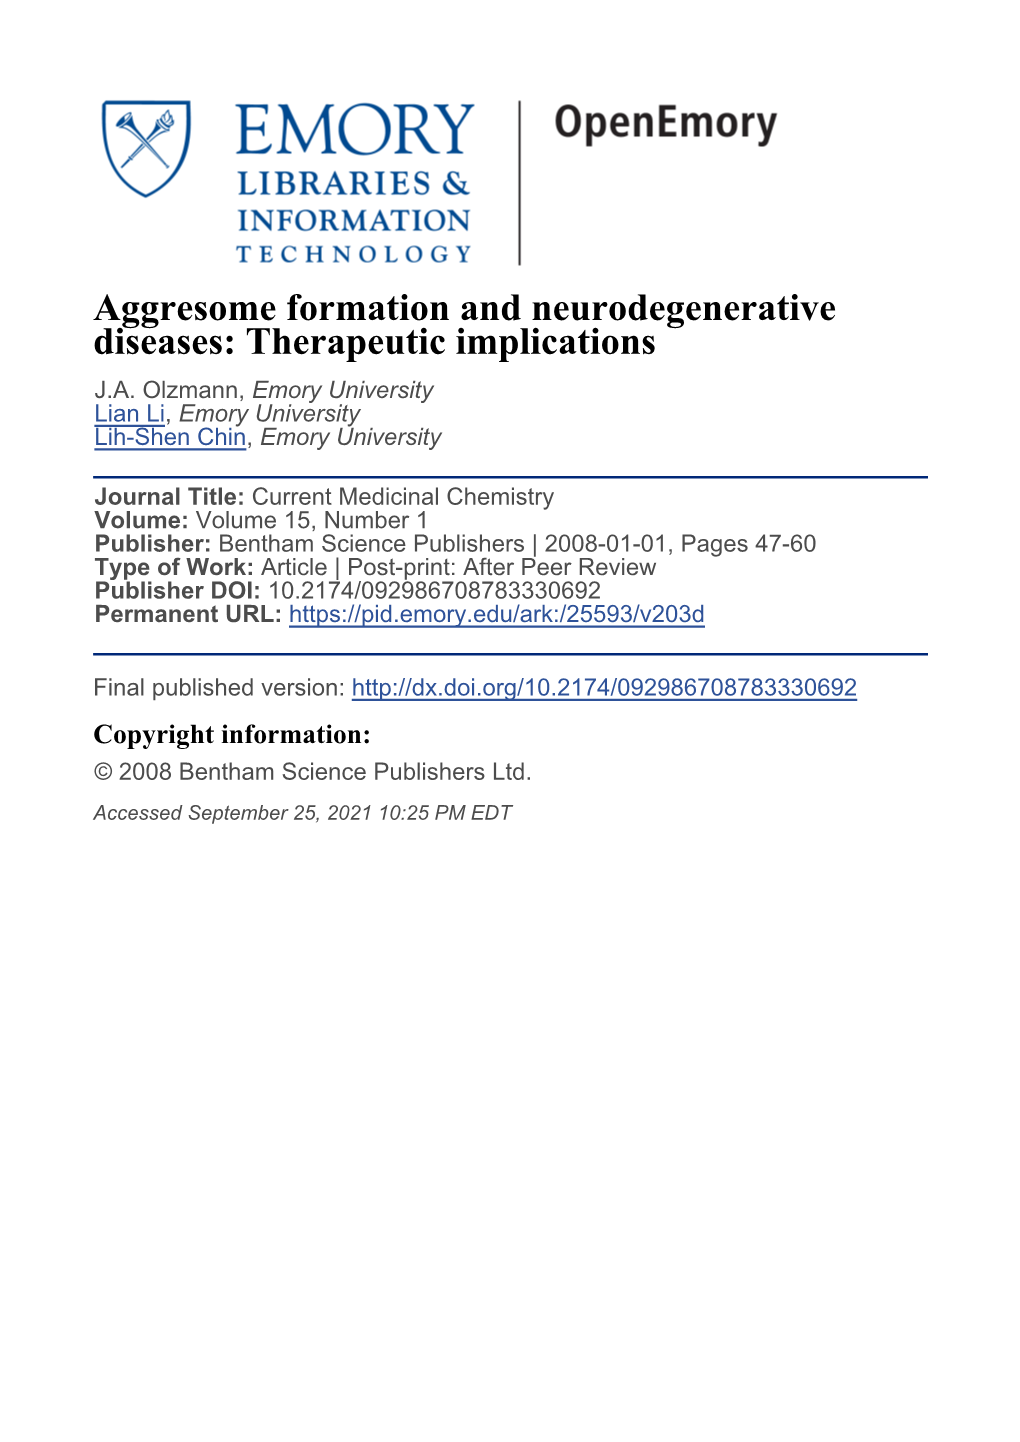 Aggresome Formation and Neurodegenerative Diseases: Therapeutic Implications J.A